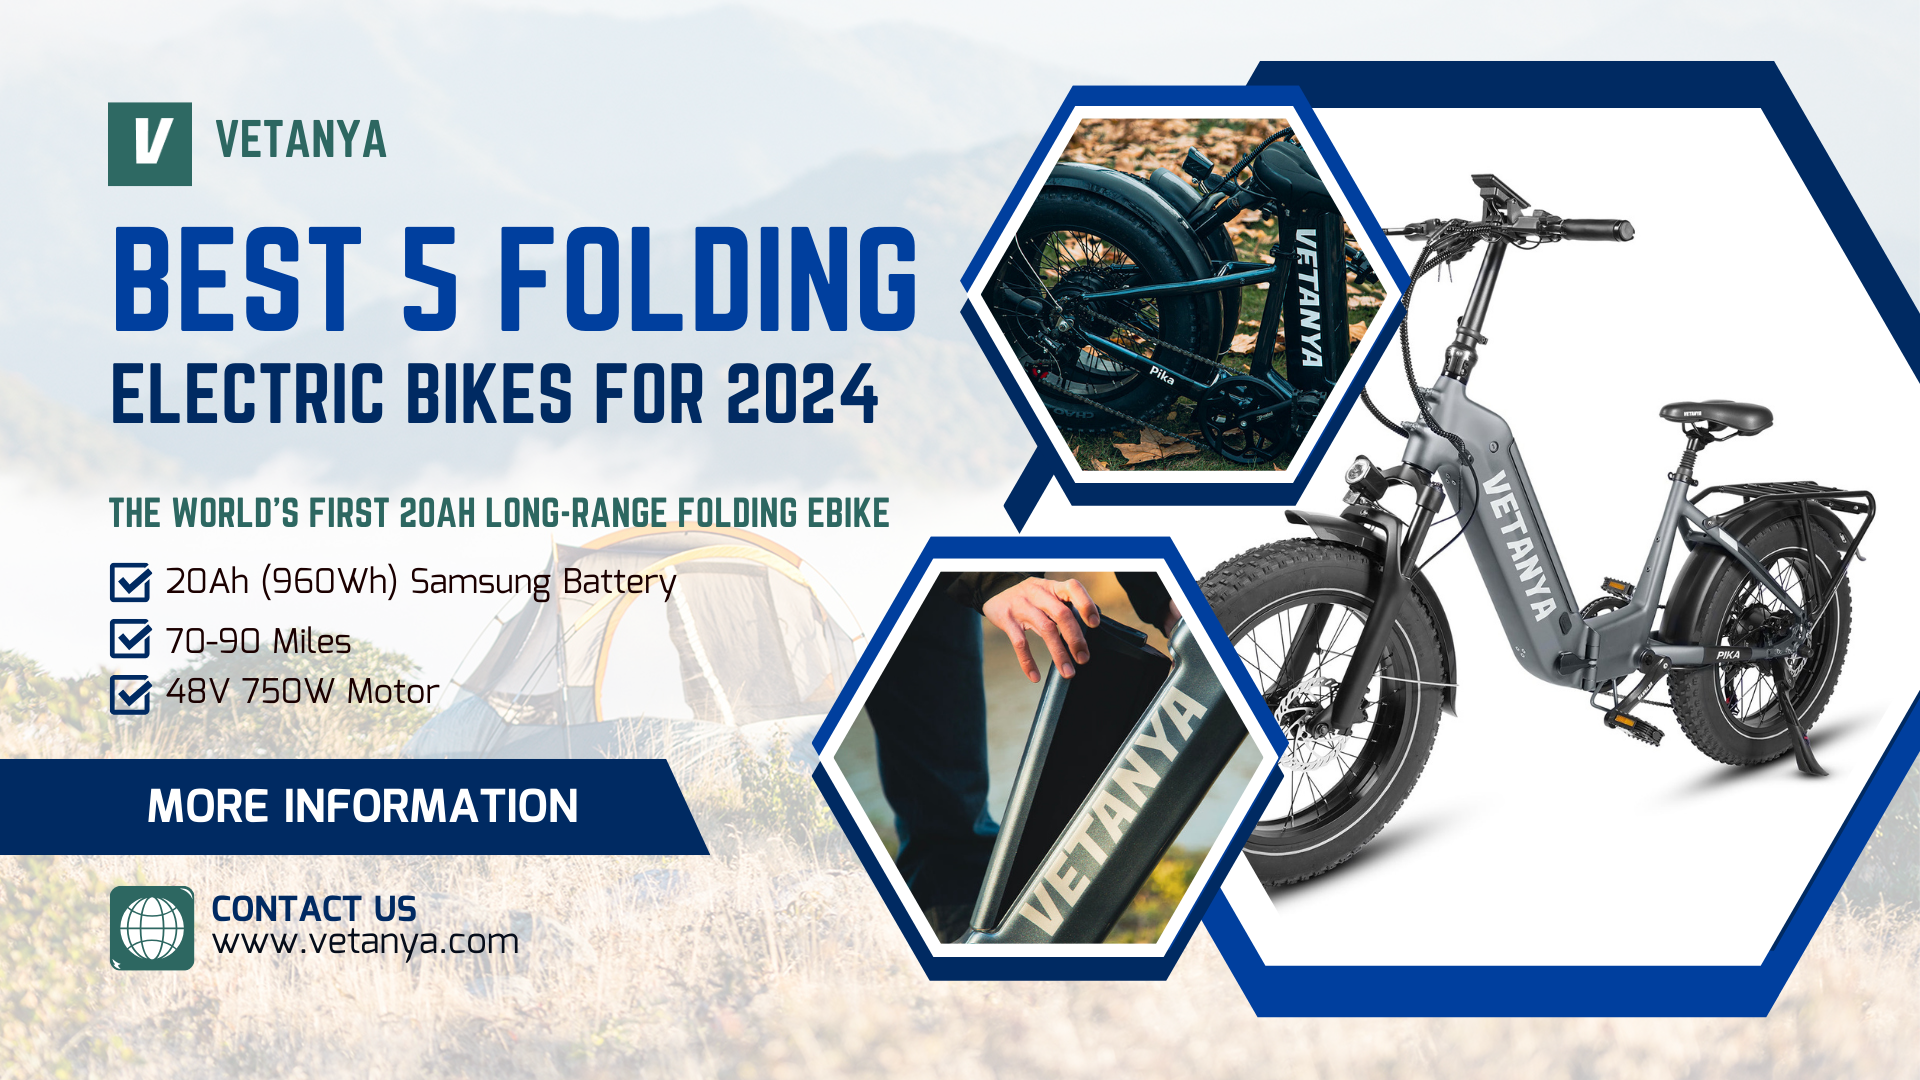 Best 5 Folding Electric Bikes for 2024